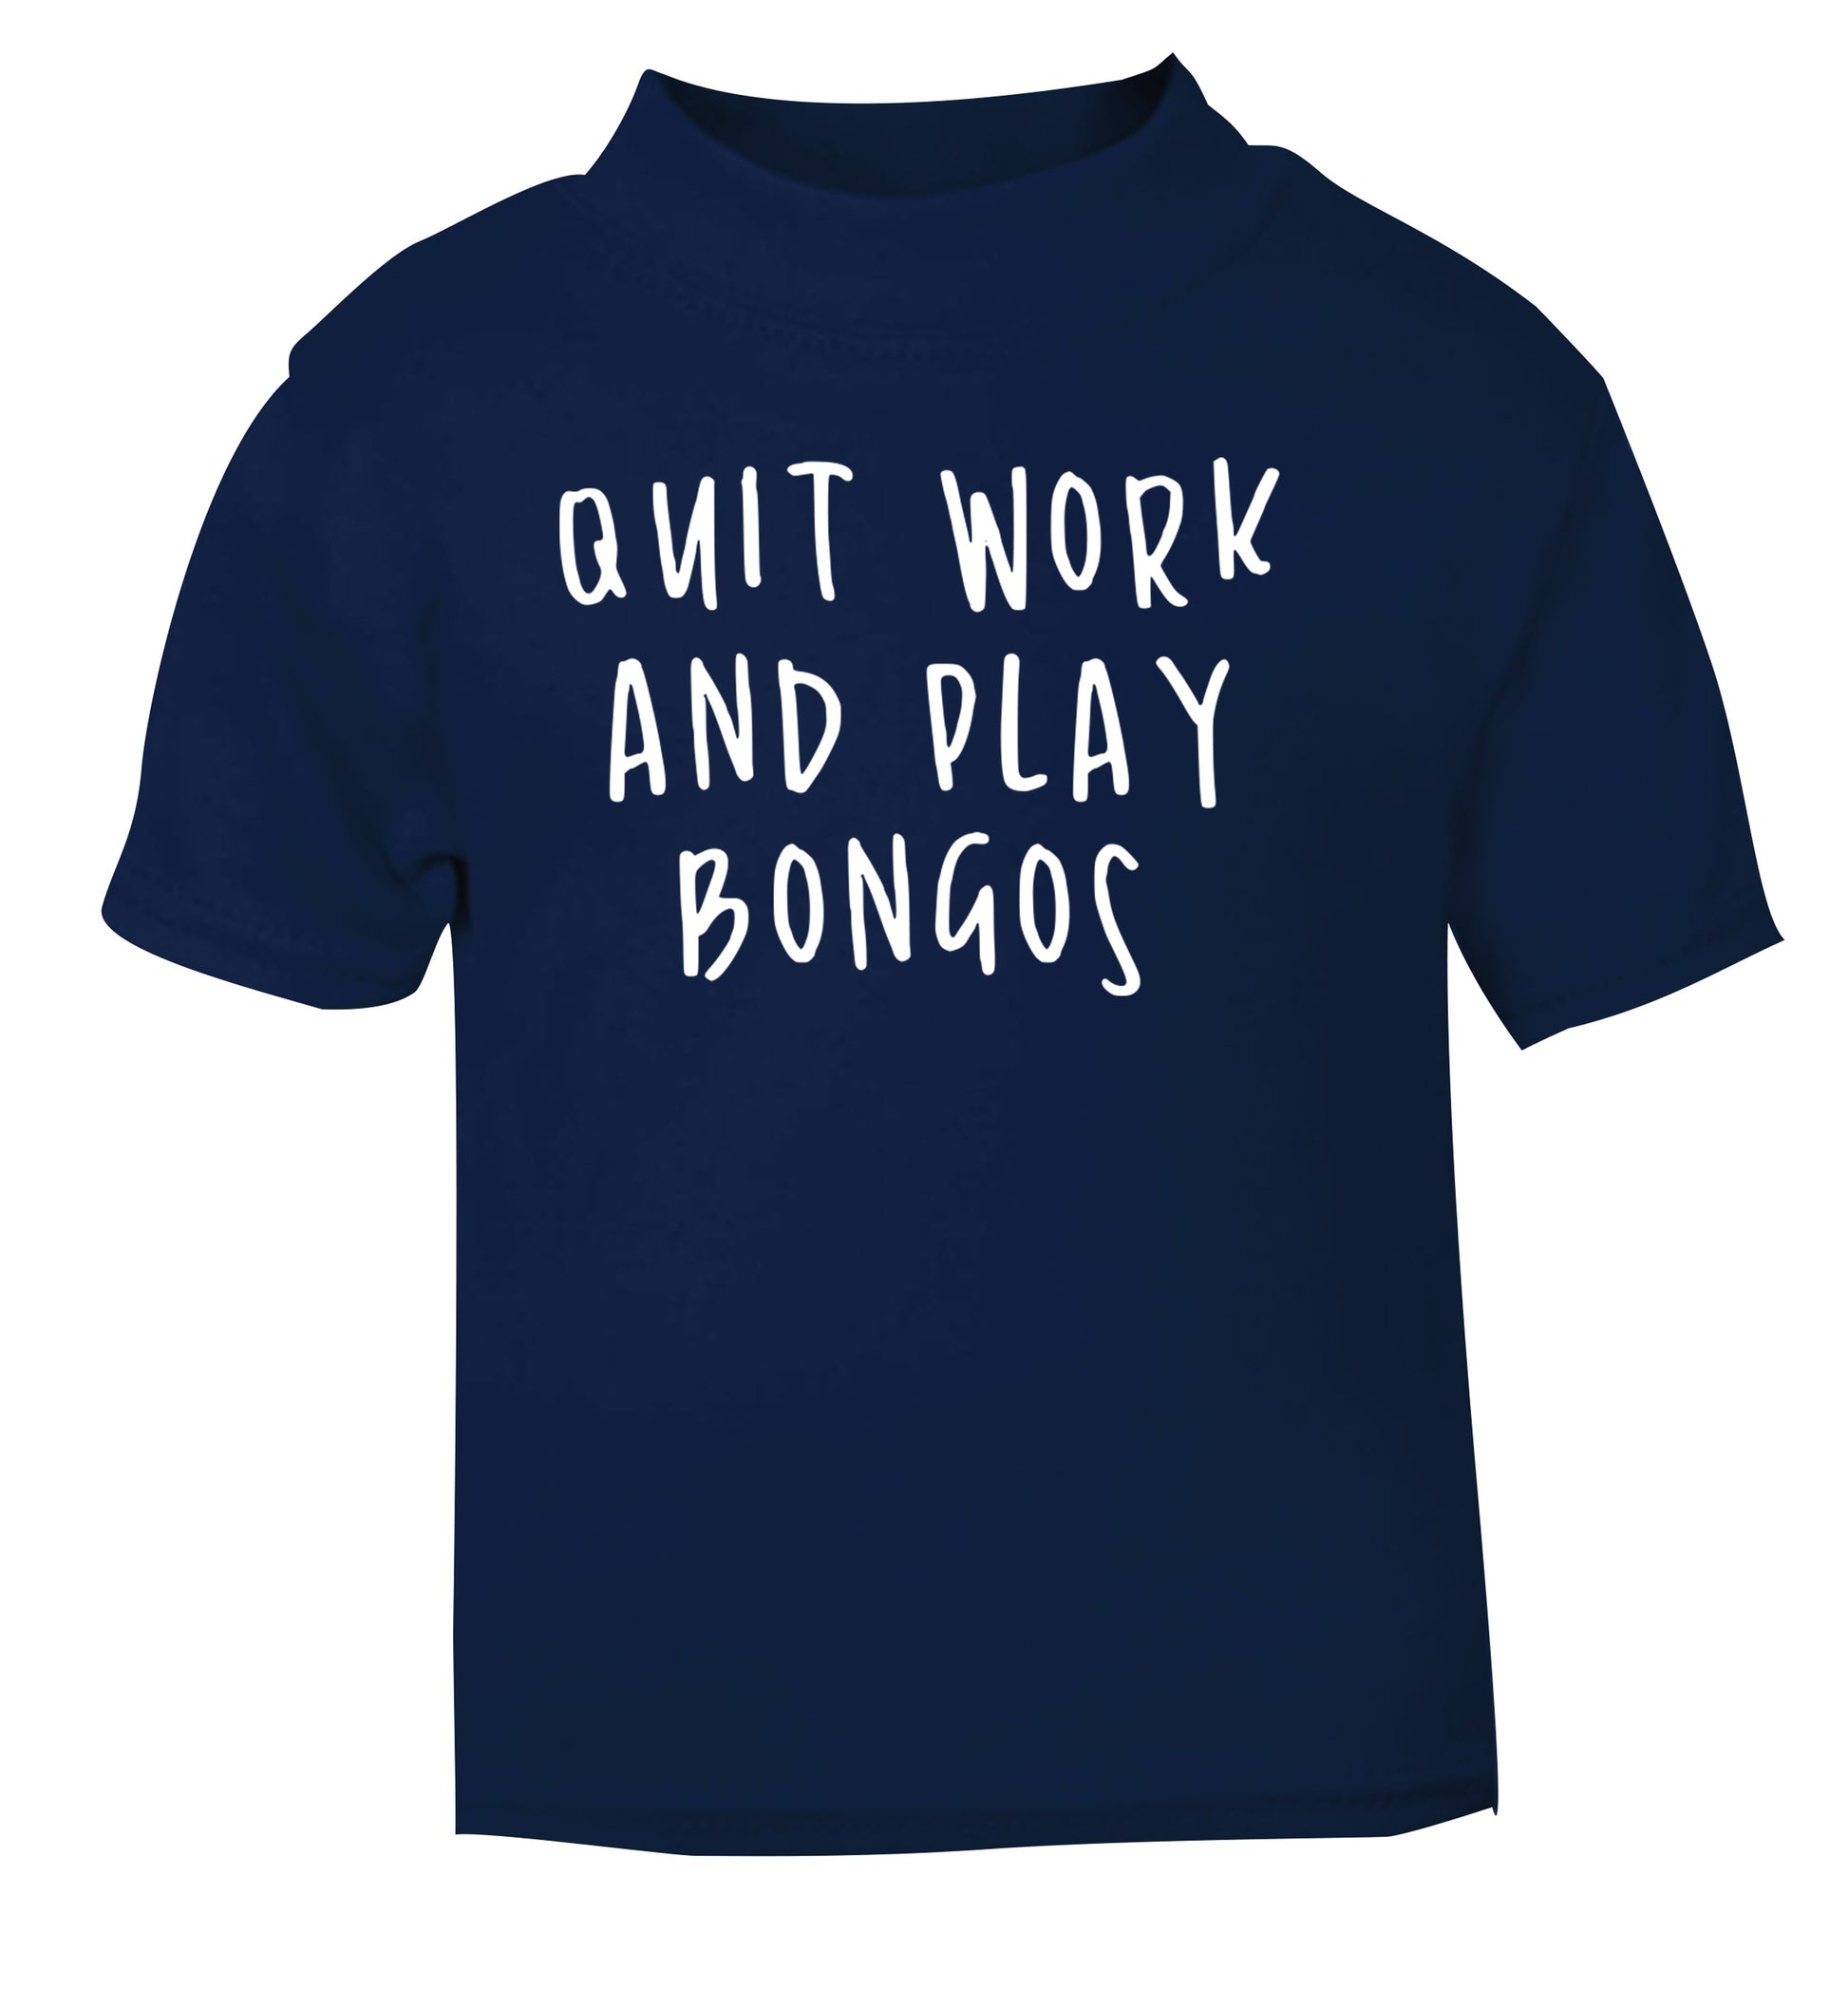 Quit work and play bongos navy Baby Toddler Tshirt 2 Years